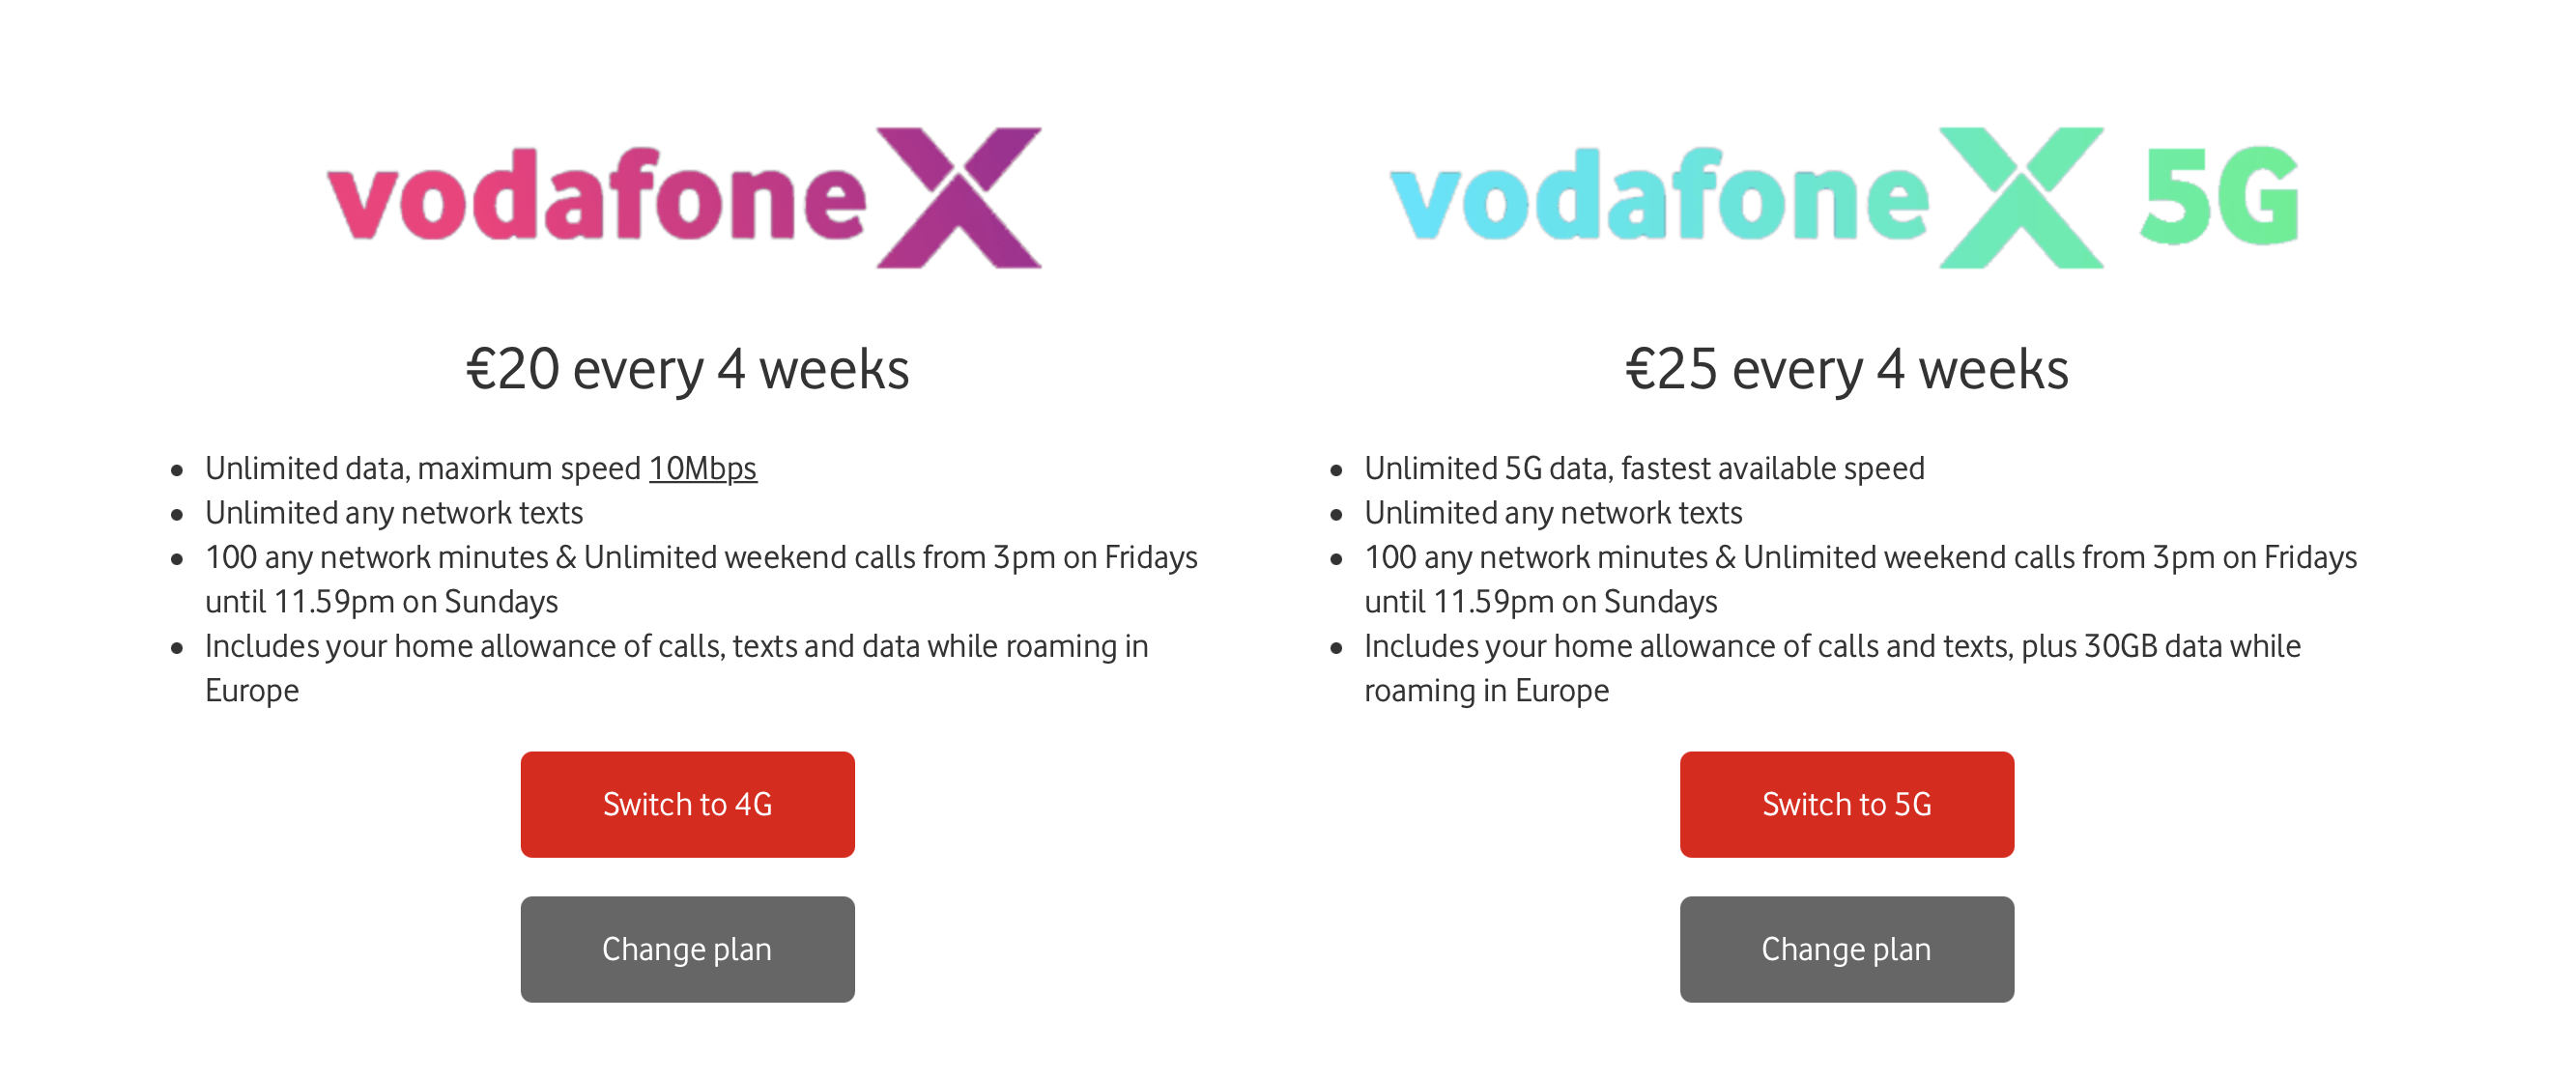 Vodafone X: Something for Everyone